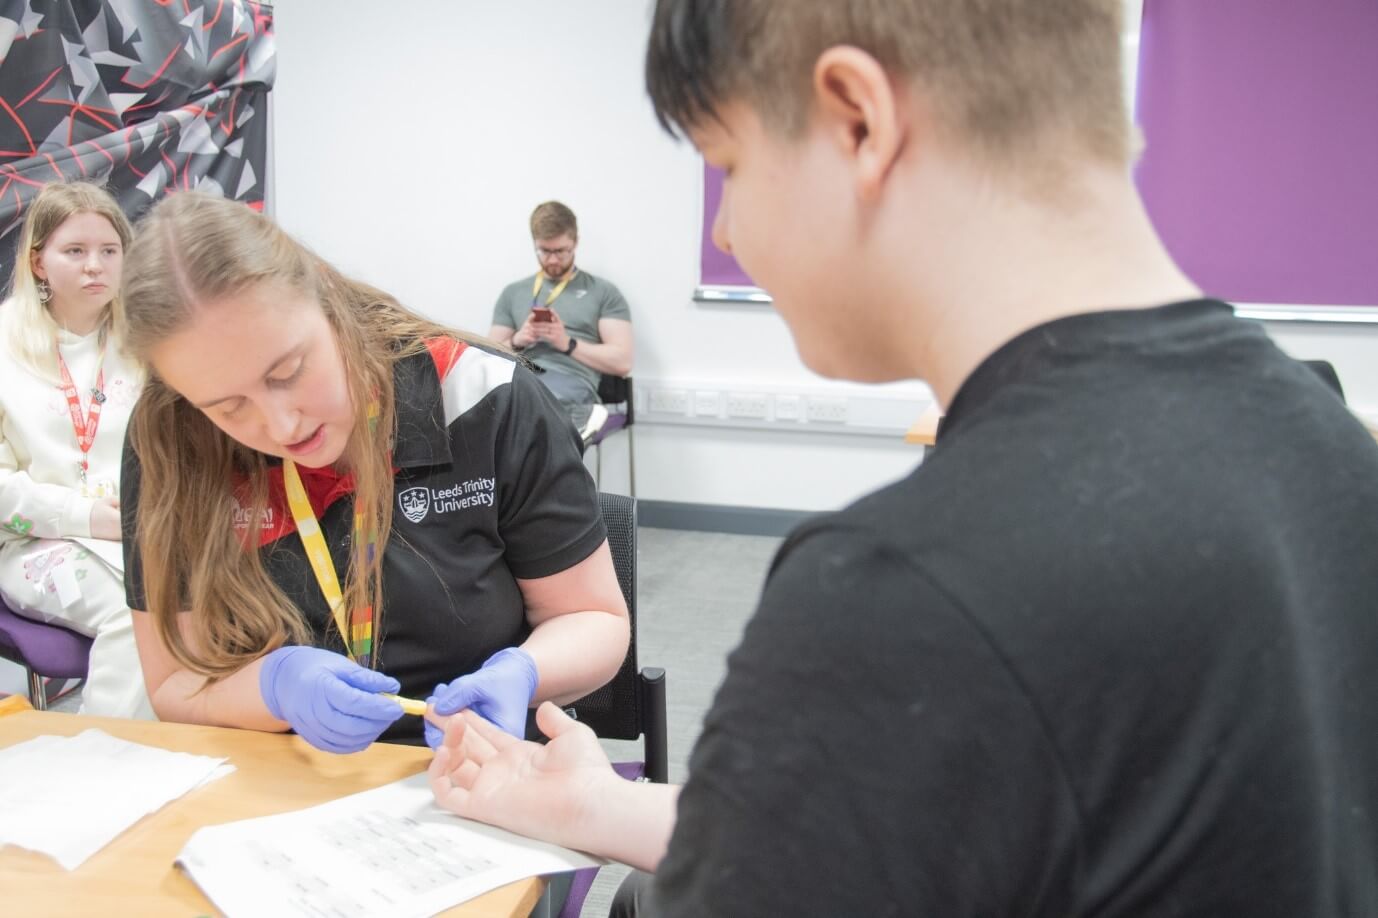 A student having a finger prick test done